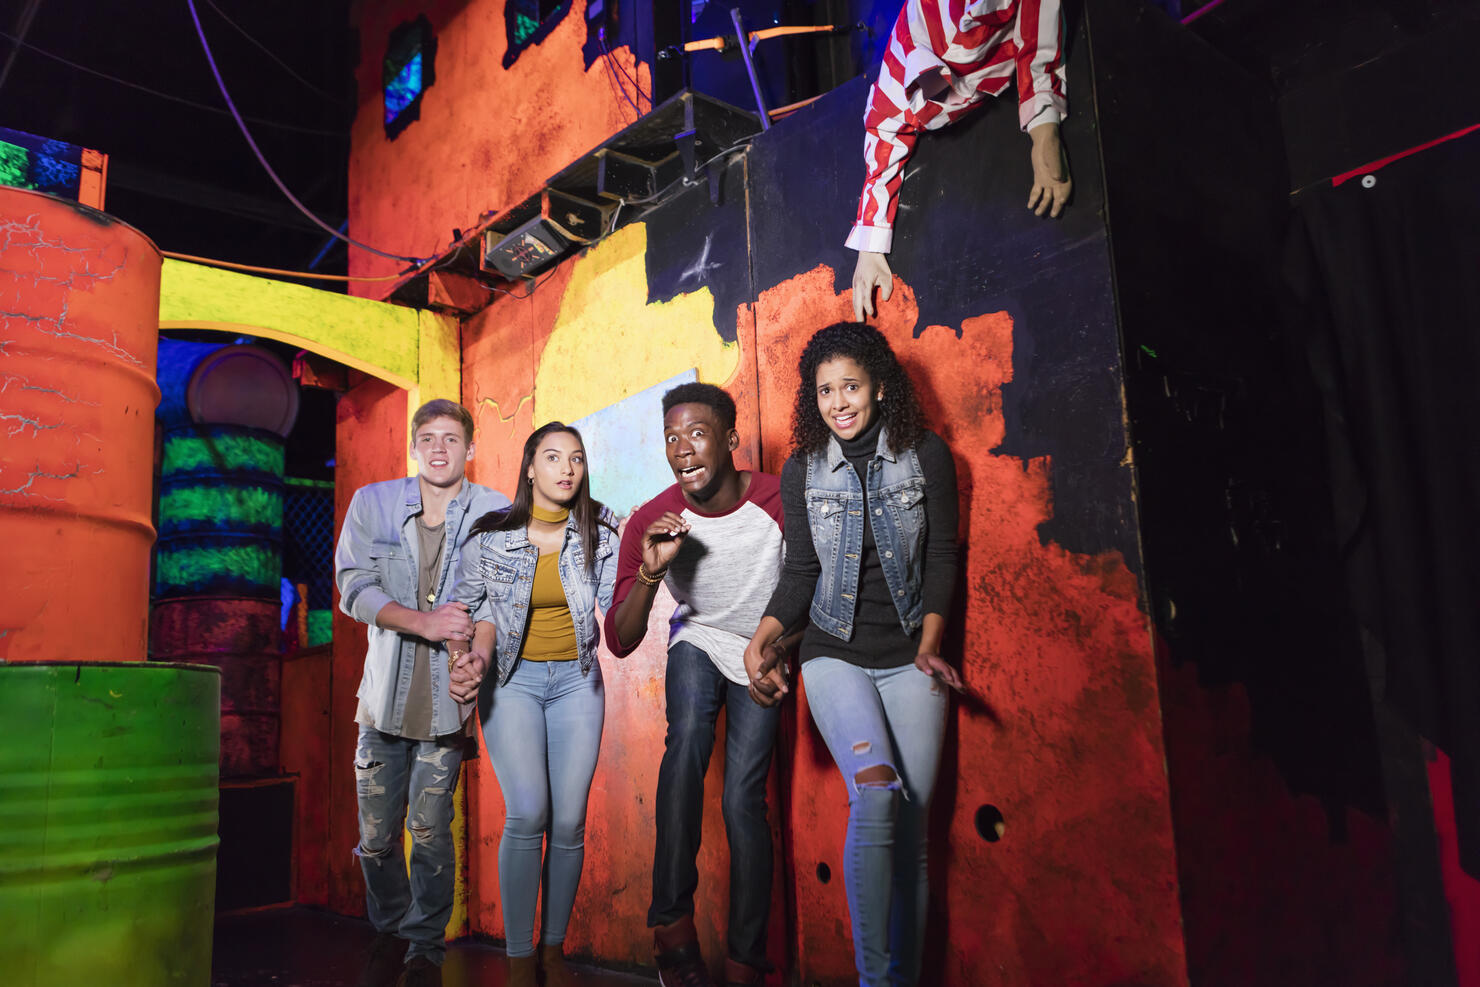 Multi-ethnic group of young adults in haunted house